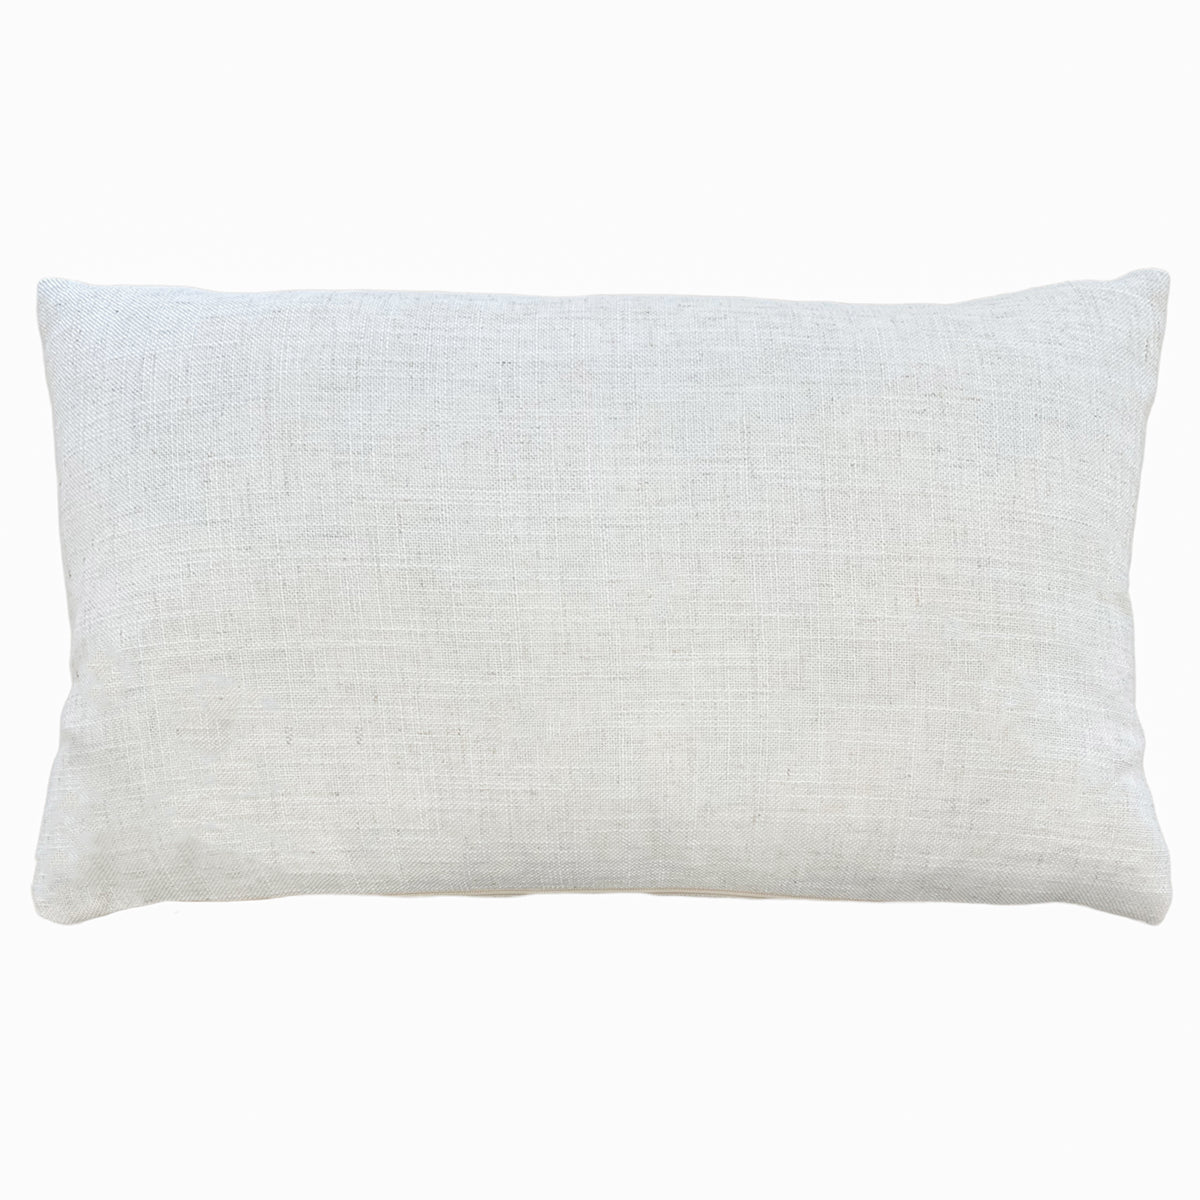 Snowy Hedgys 50cm Bolster Cushion by Roseland Furniture